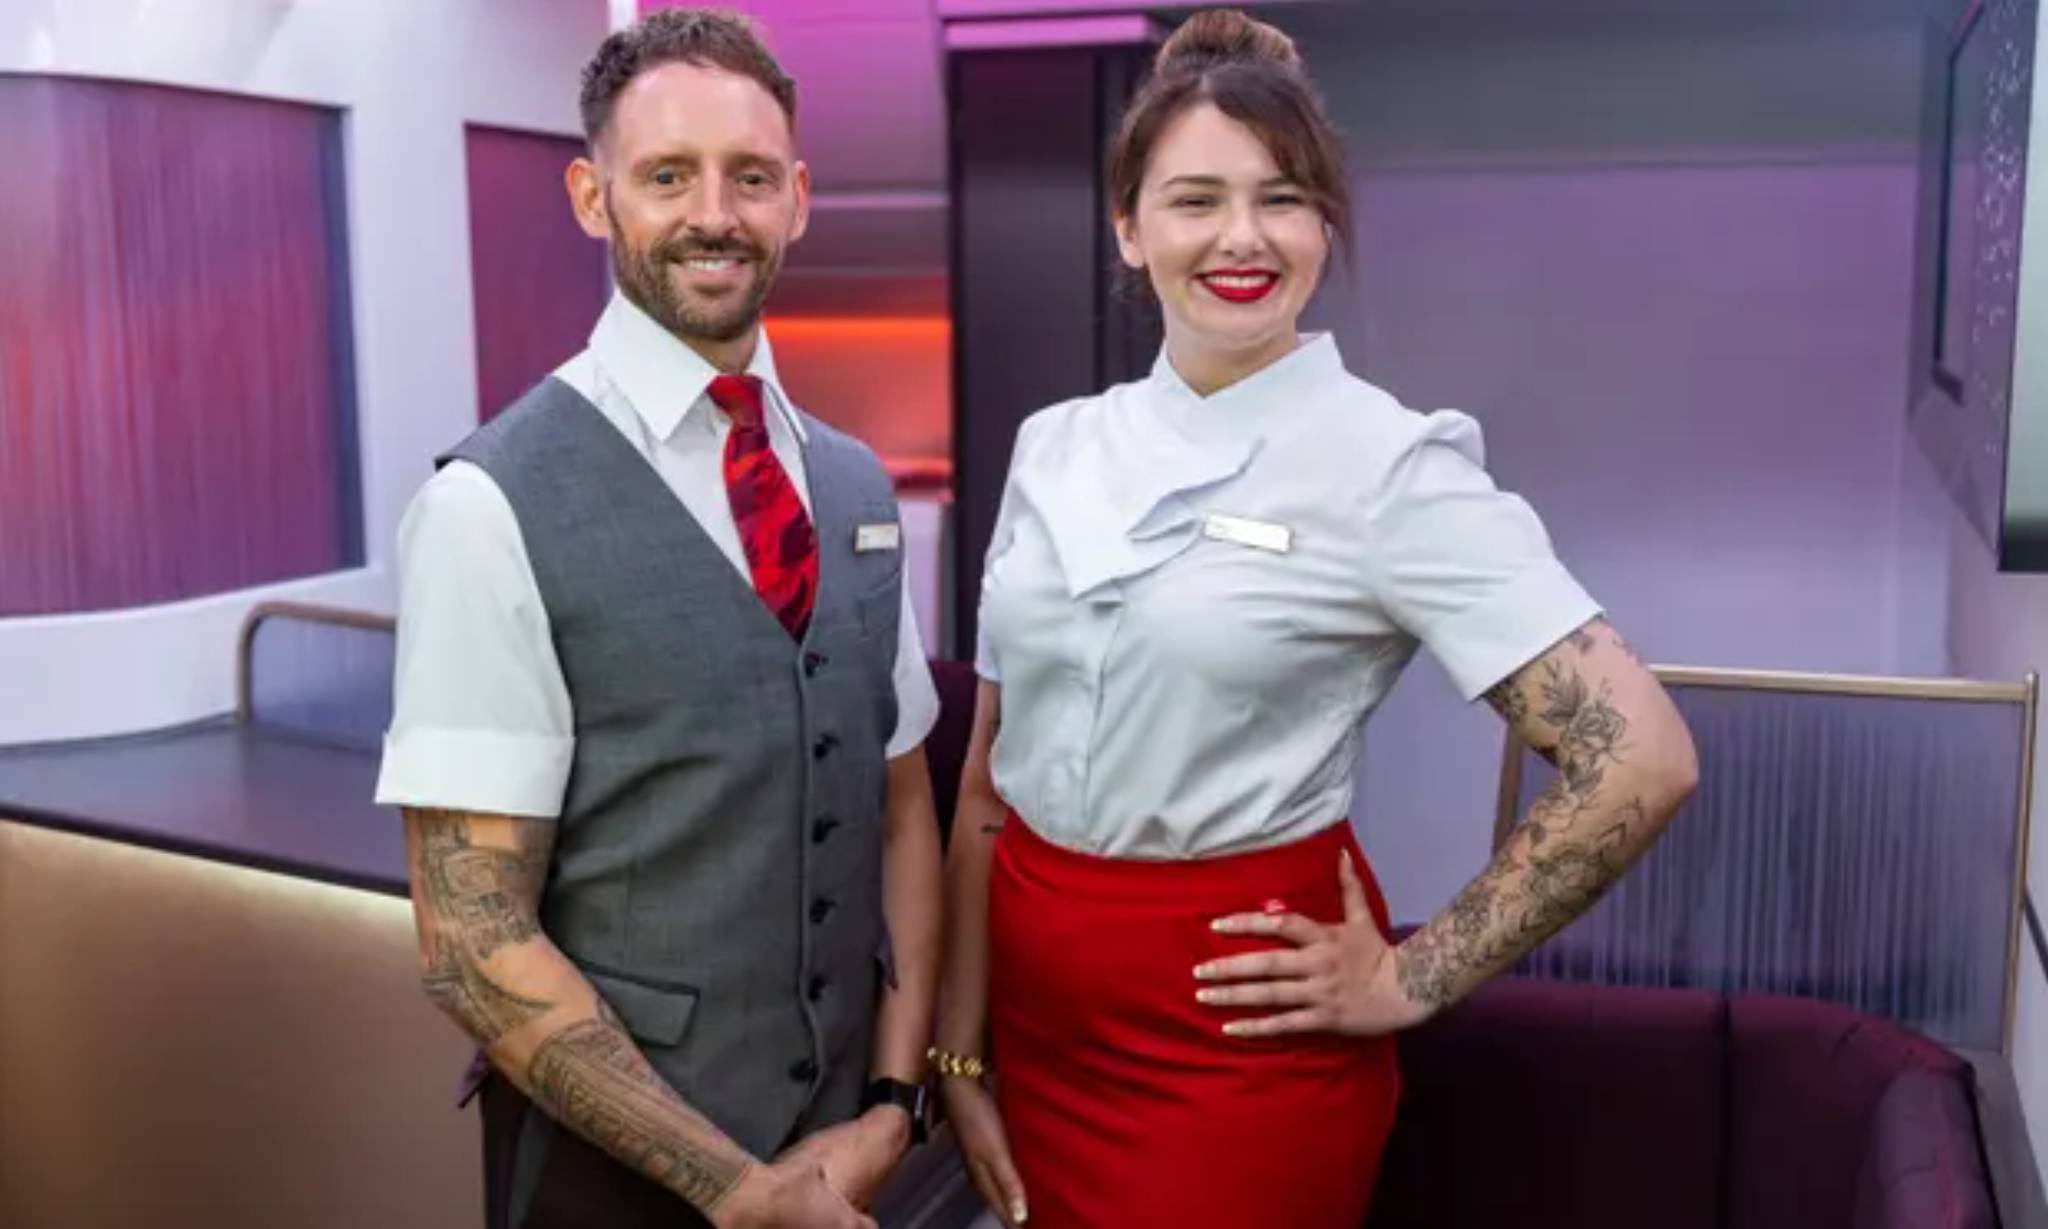 Virgin responds to demand for relaxed work dress codes